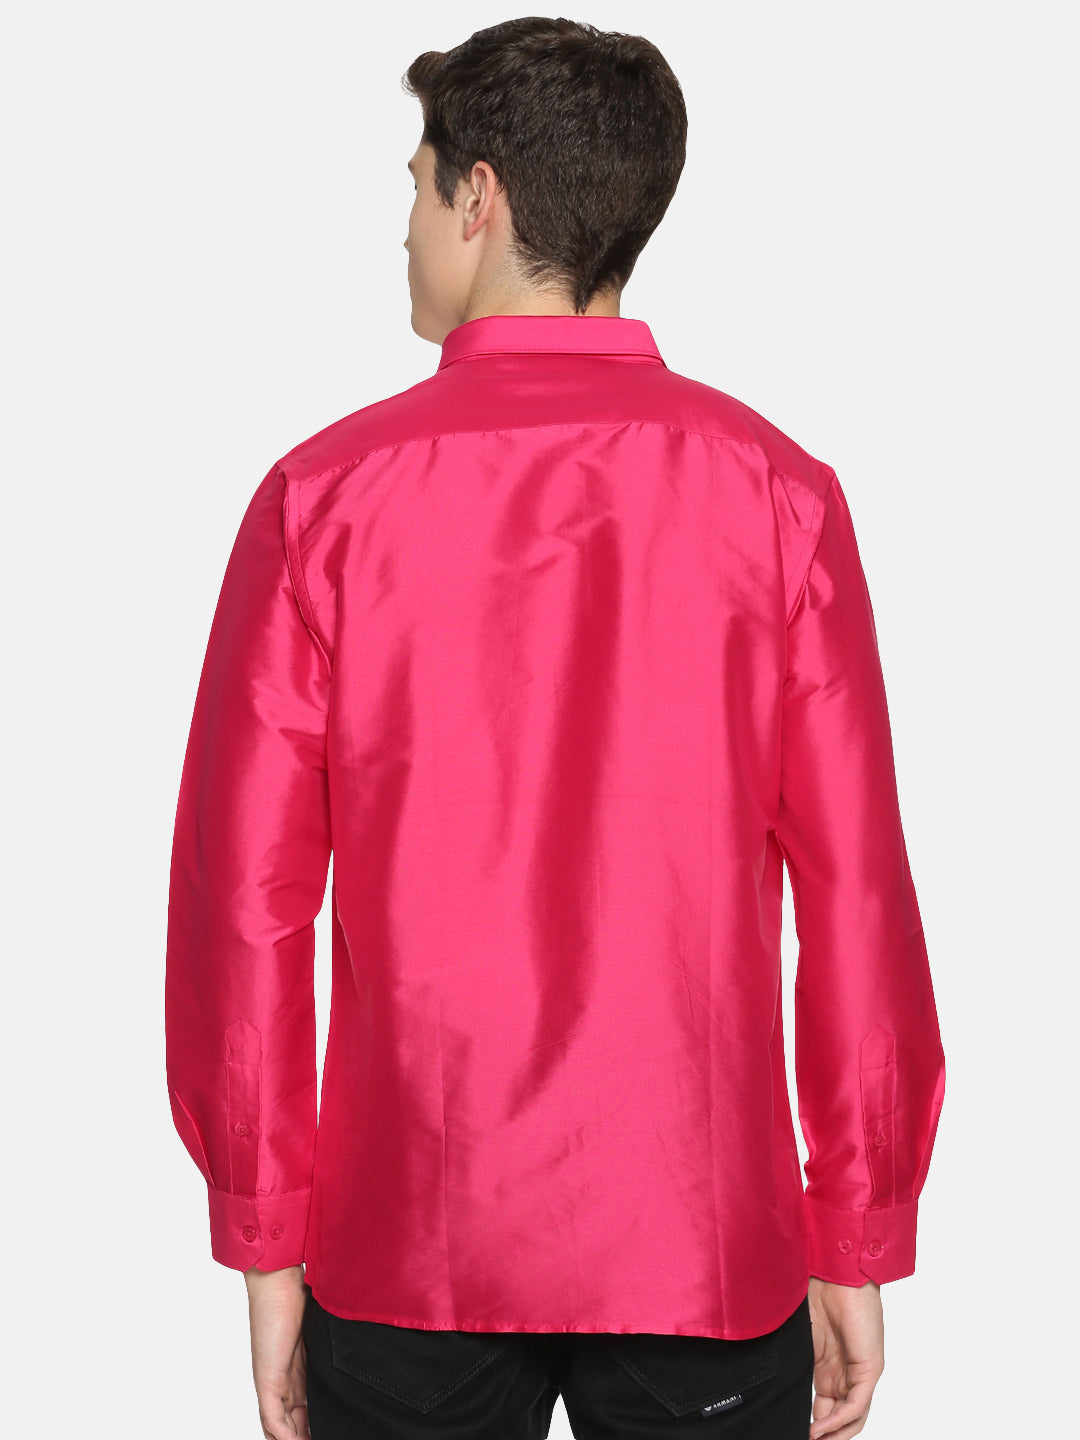 Fushsia Polyester Slim Fit Solid Party Shirt